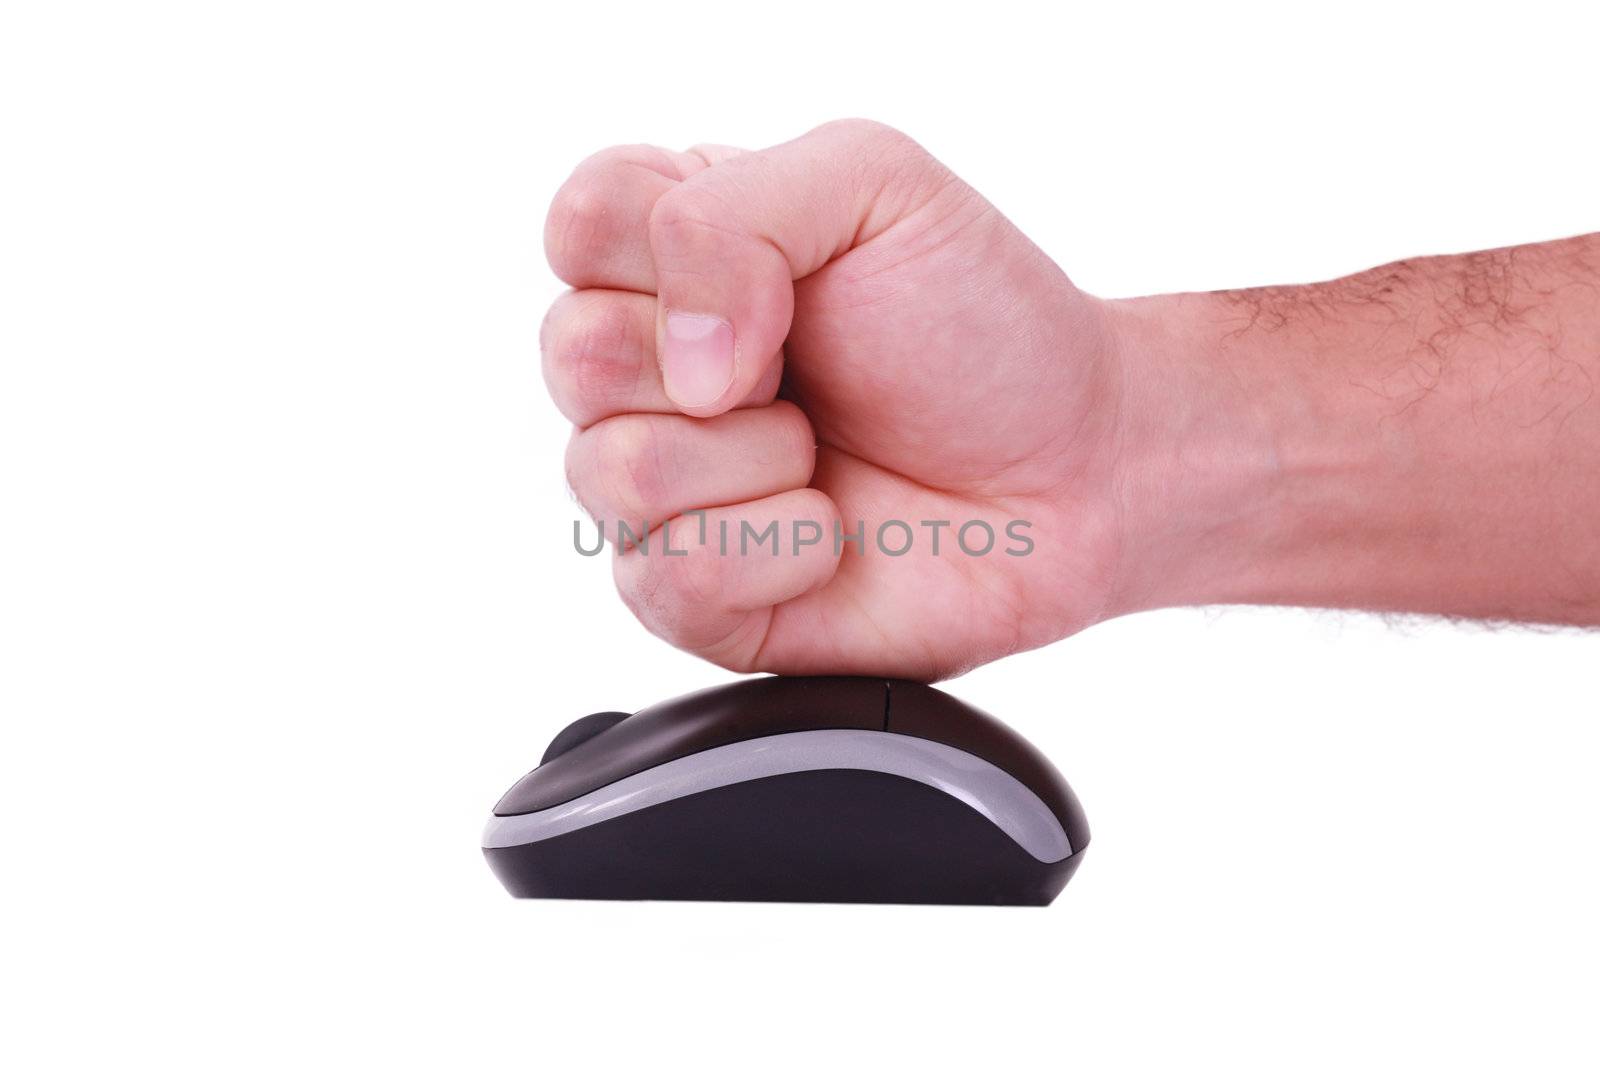 A male man punching a white mouse, white background